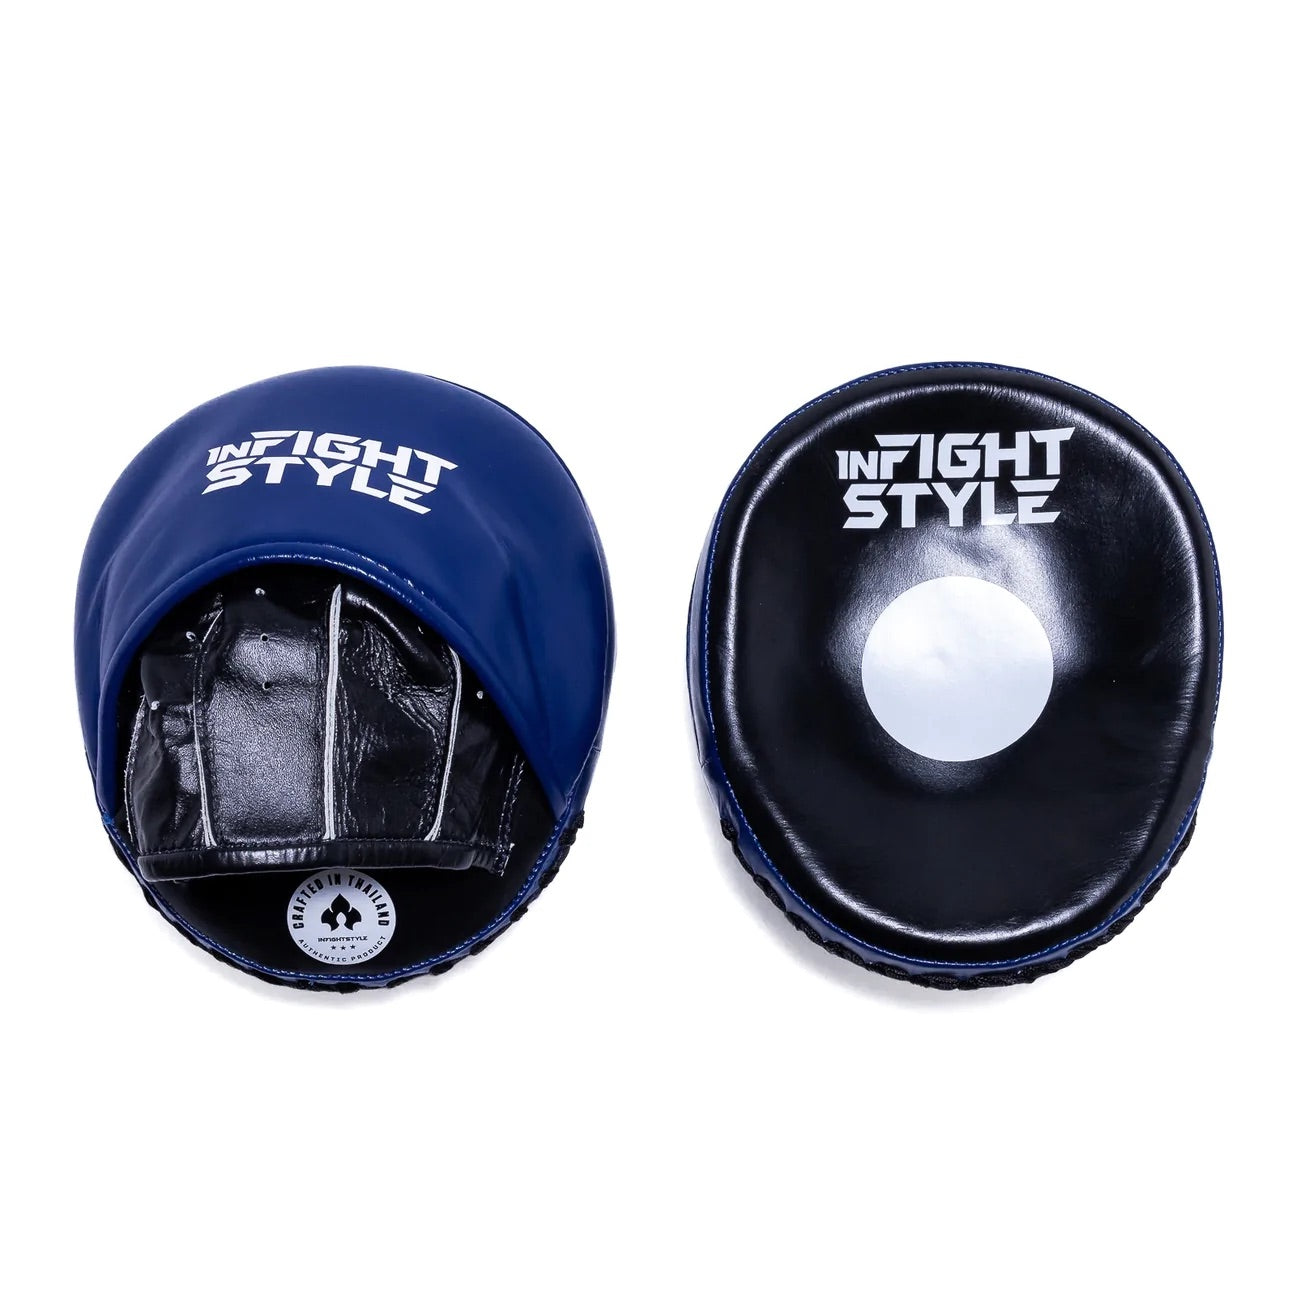 InFightStyle Muay Thai Boxing Focus Punch Mitts - Black/Blue